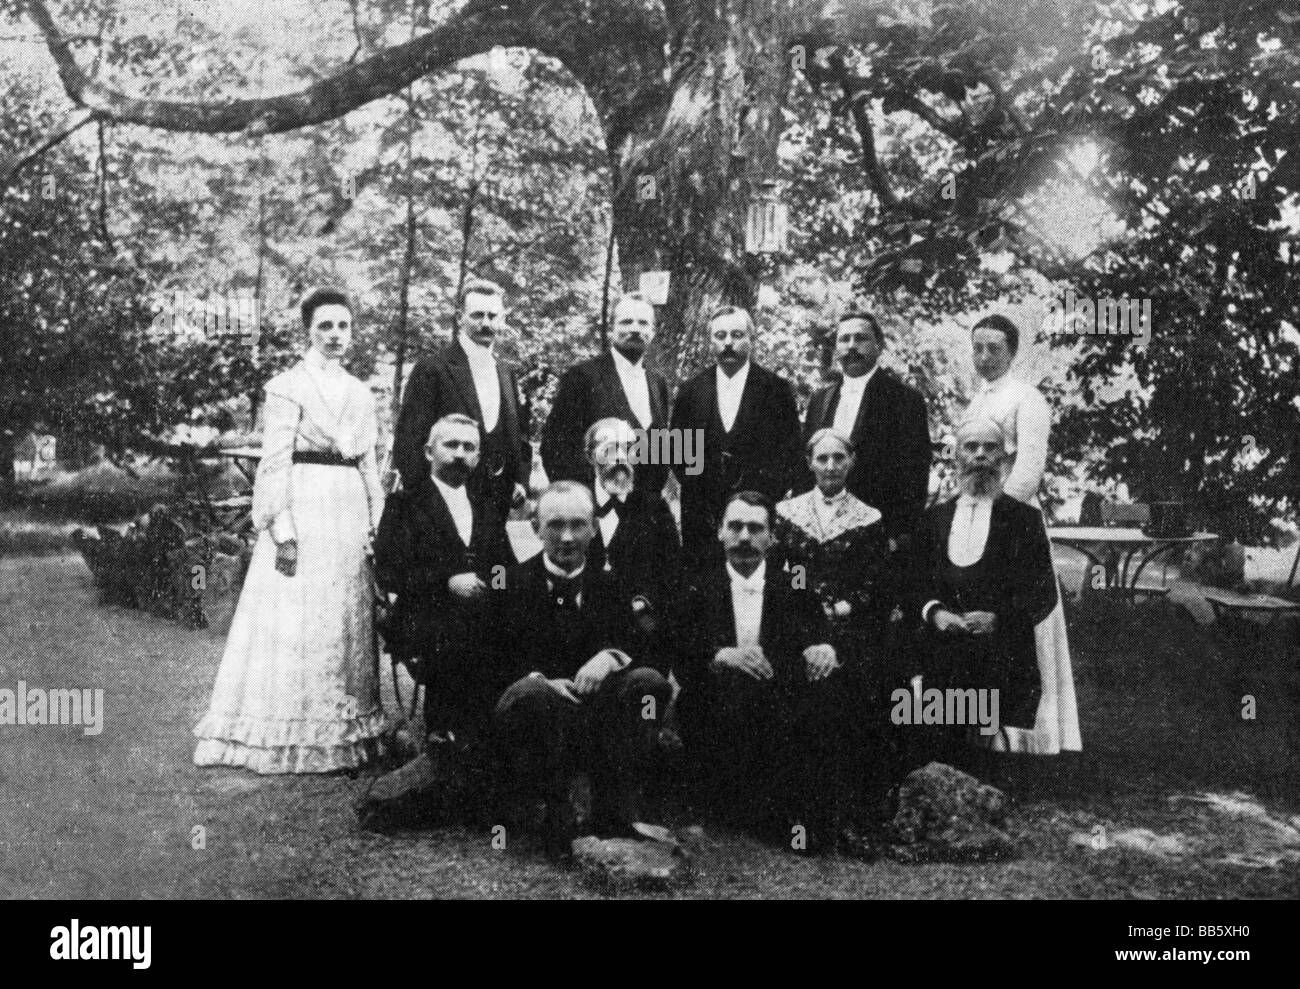 Wundt, Wilhelm, 16.8.1832 - 31.8.1920, German philosopher and psychologist, group picture with his family and employees, at his 70th birthday, 1902, Eleonore Wundt, Erich Mosch, Oswald Külpe, Gustav Störring, August Kirschmann, middle row: Emil Kraepelin, W. Wundt, Sophie Wundt, Reinecke, first row: Max Wundt, Wilhelm Wirth, , Stock Photo